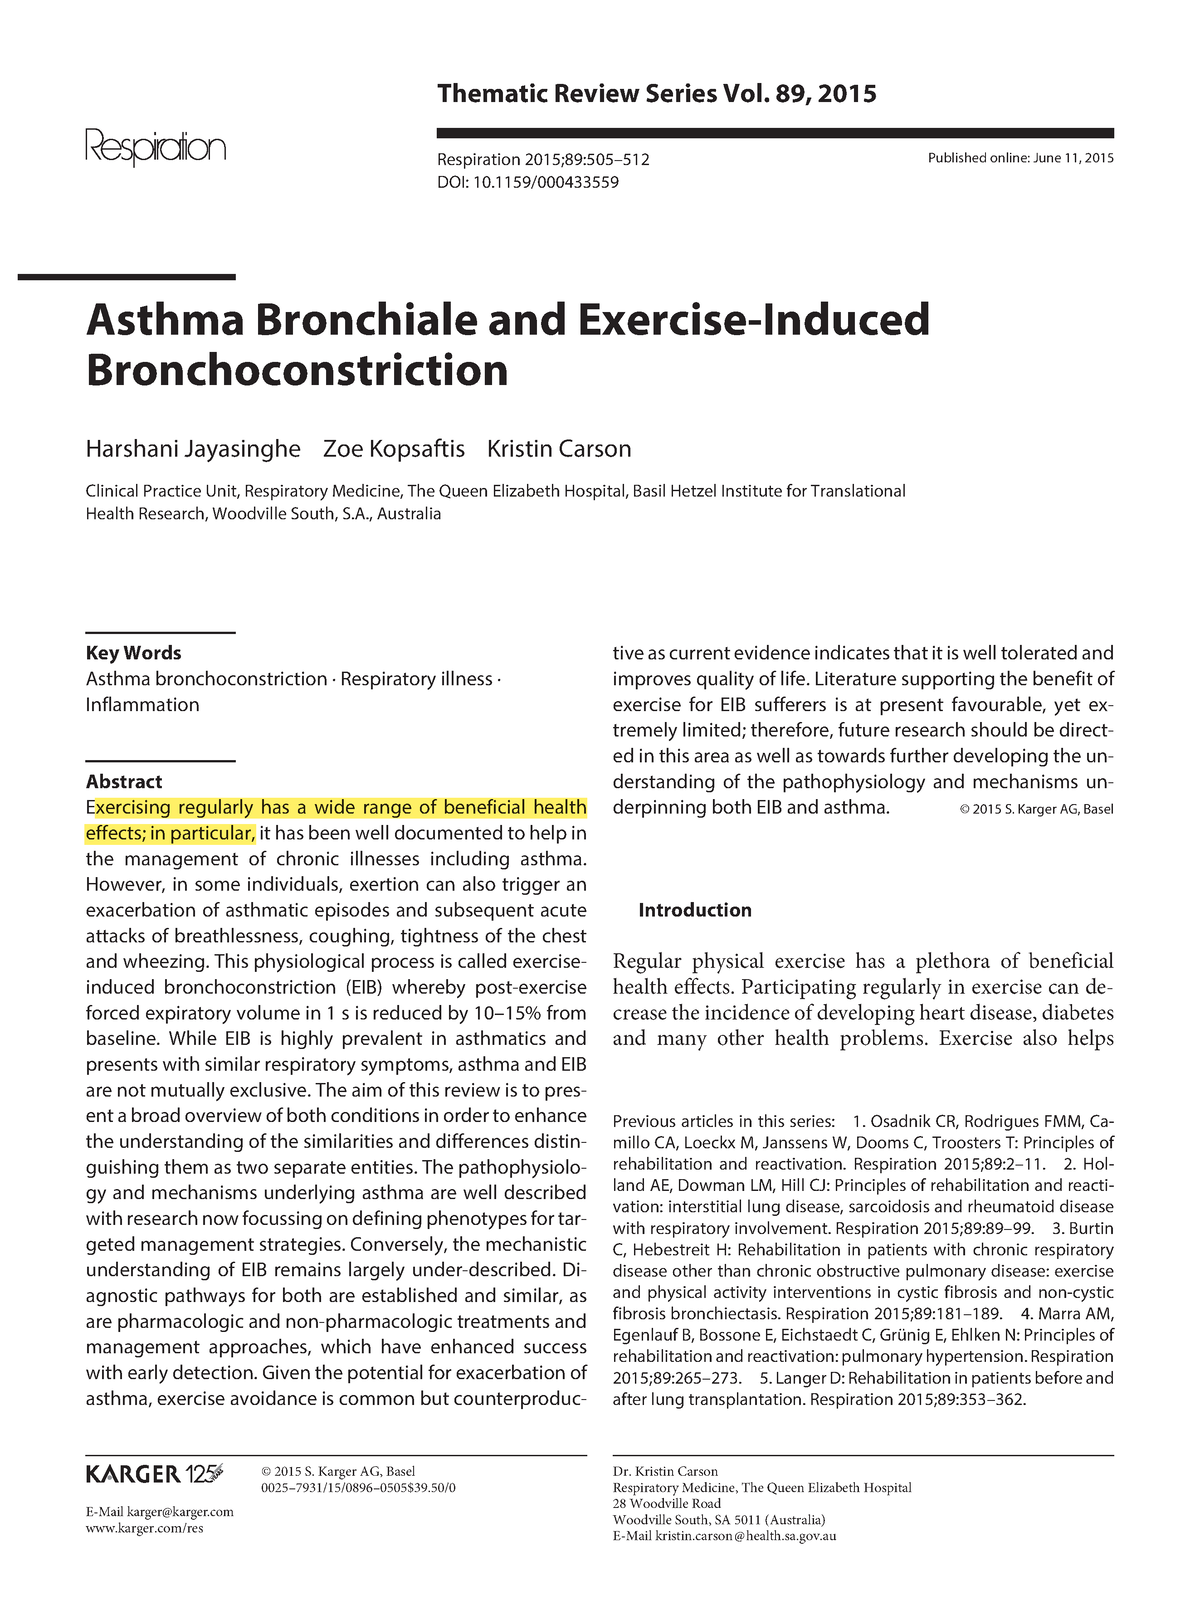 Asthma Bronchiale and Exercise-Induced Bronchoconstriction - E-Mail ...